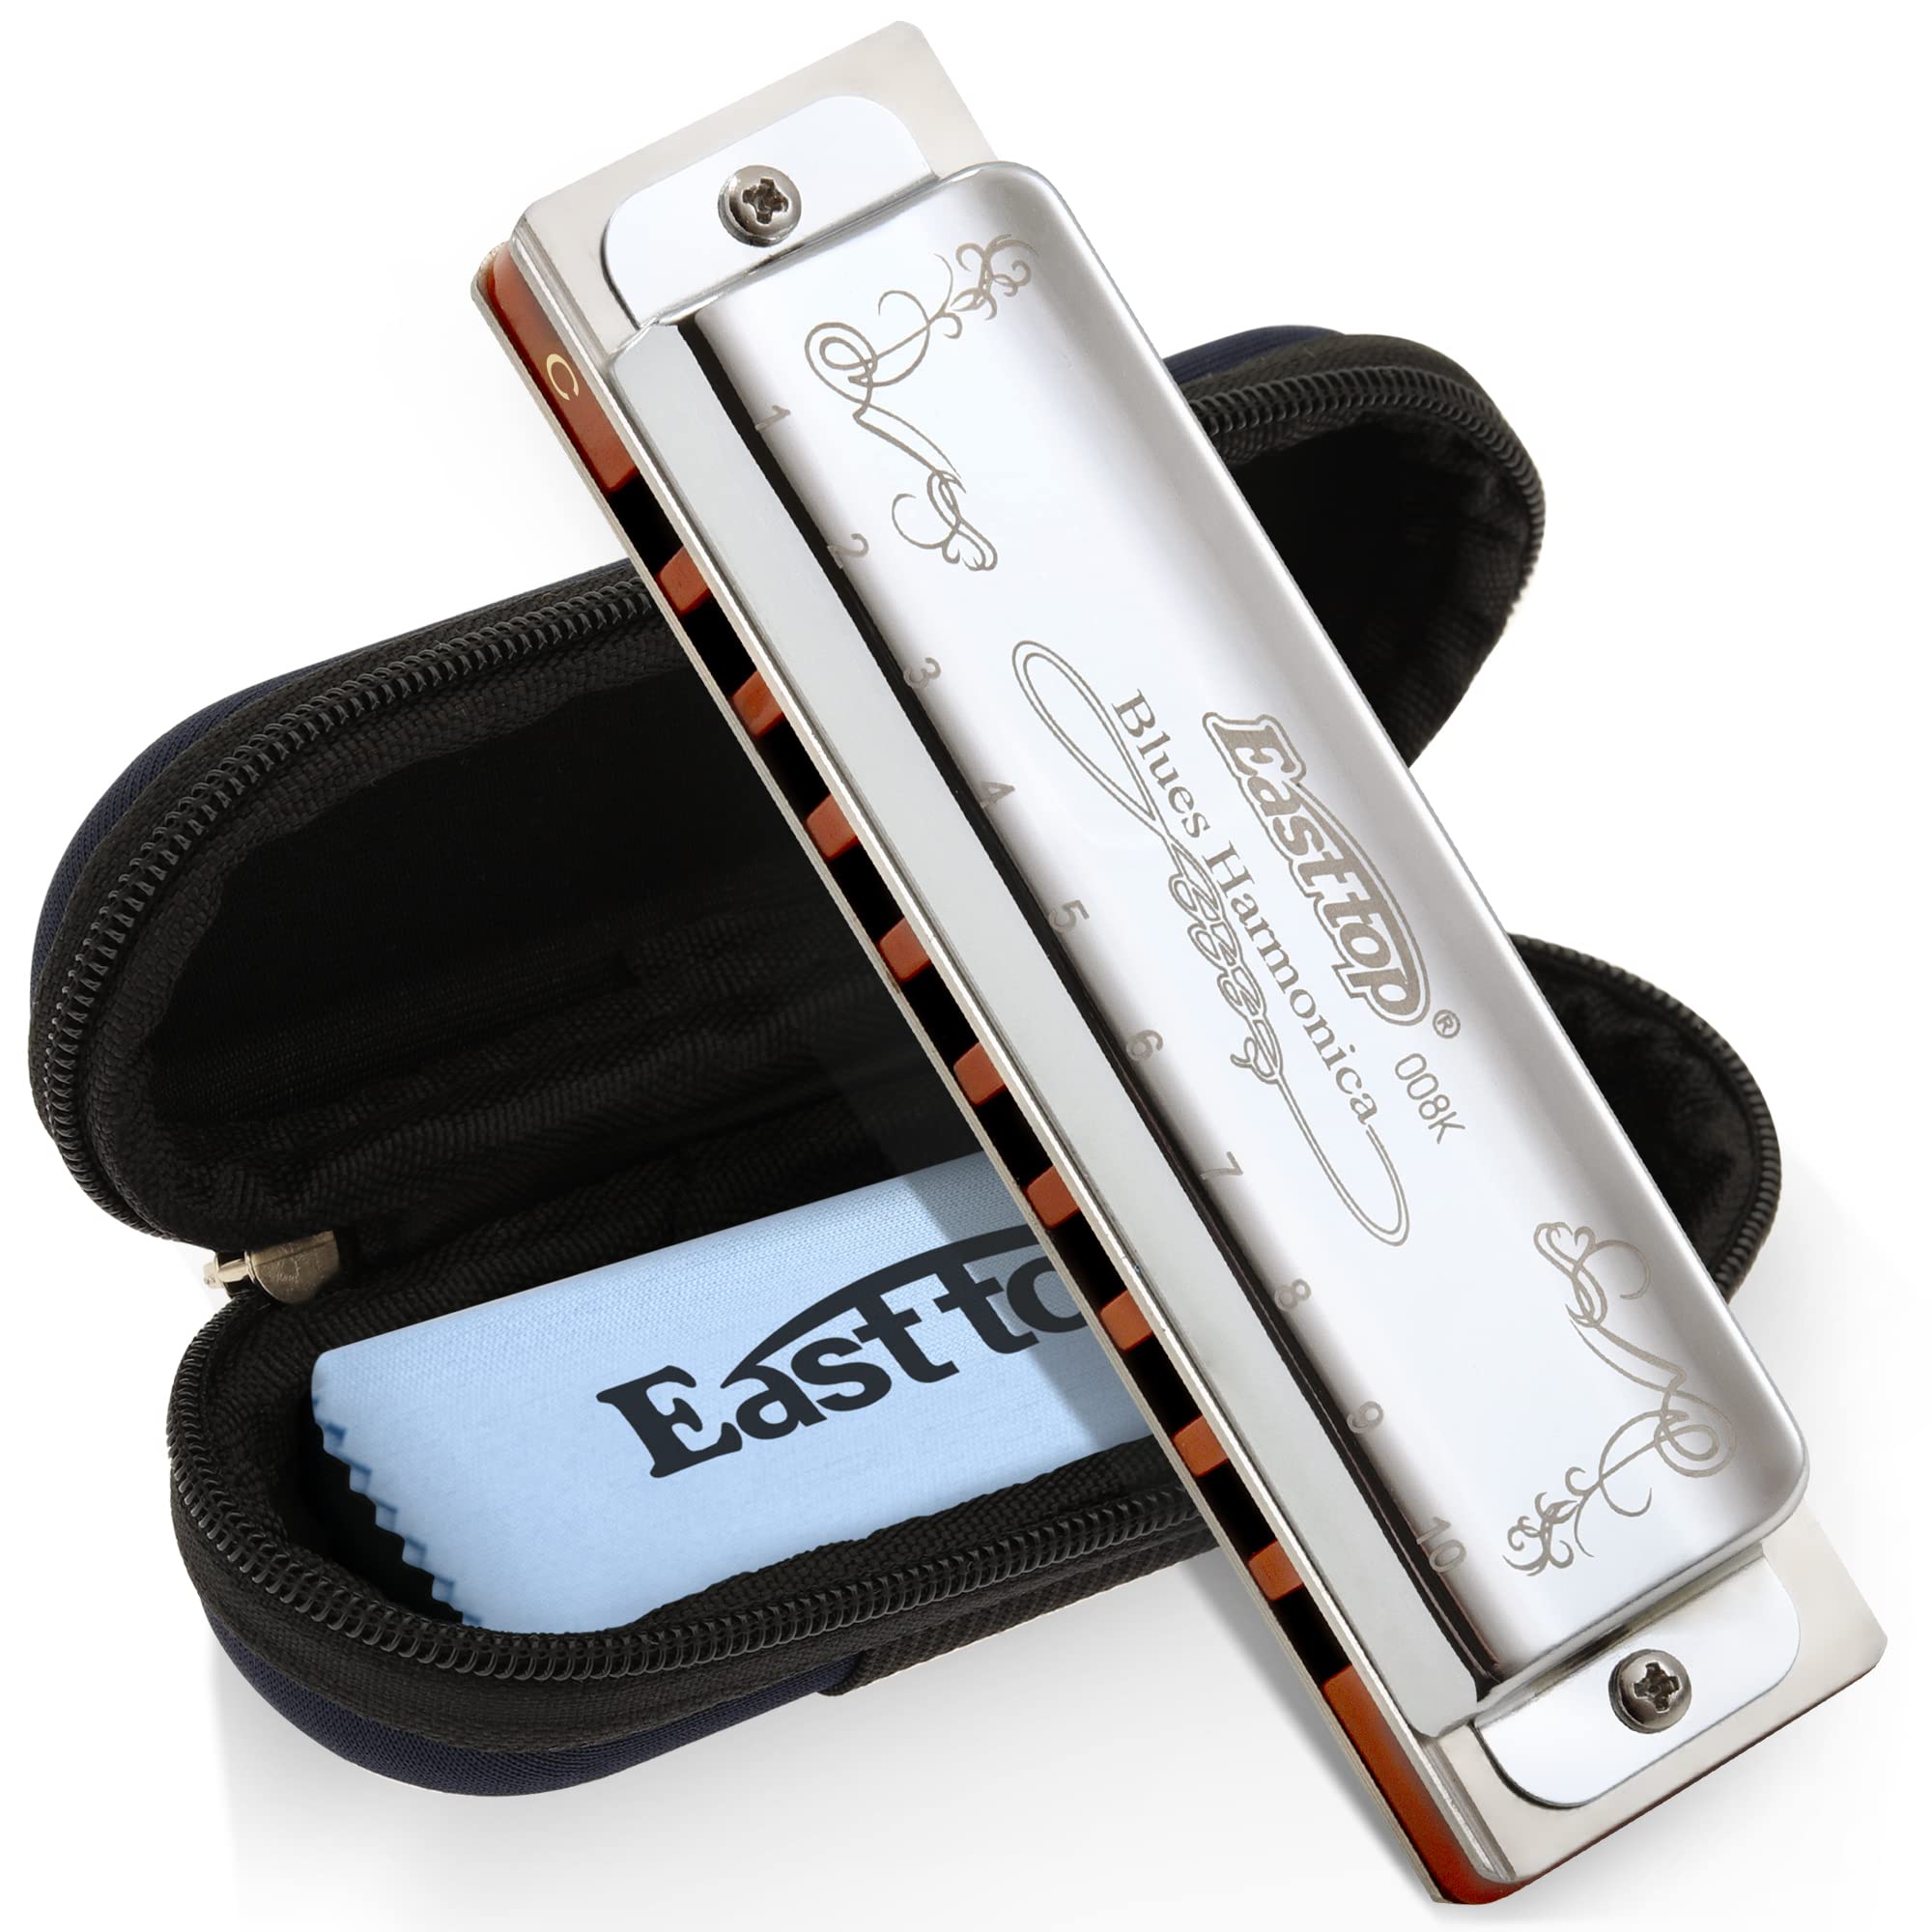 East top 10 Holes 20 Tones 008K Diatonic Harmonica  with Blue/Black/Sliver Case, Major 12 keys available,Standard Harmonicas For Adults, Professional Player, Beginner and Students（T008K-BL/BK/SR） - Easttop harmonica